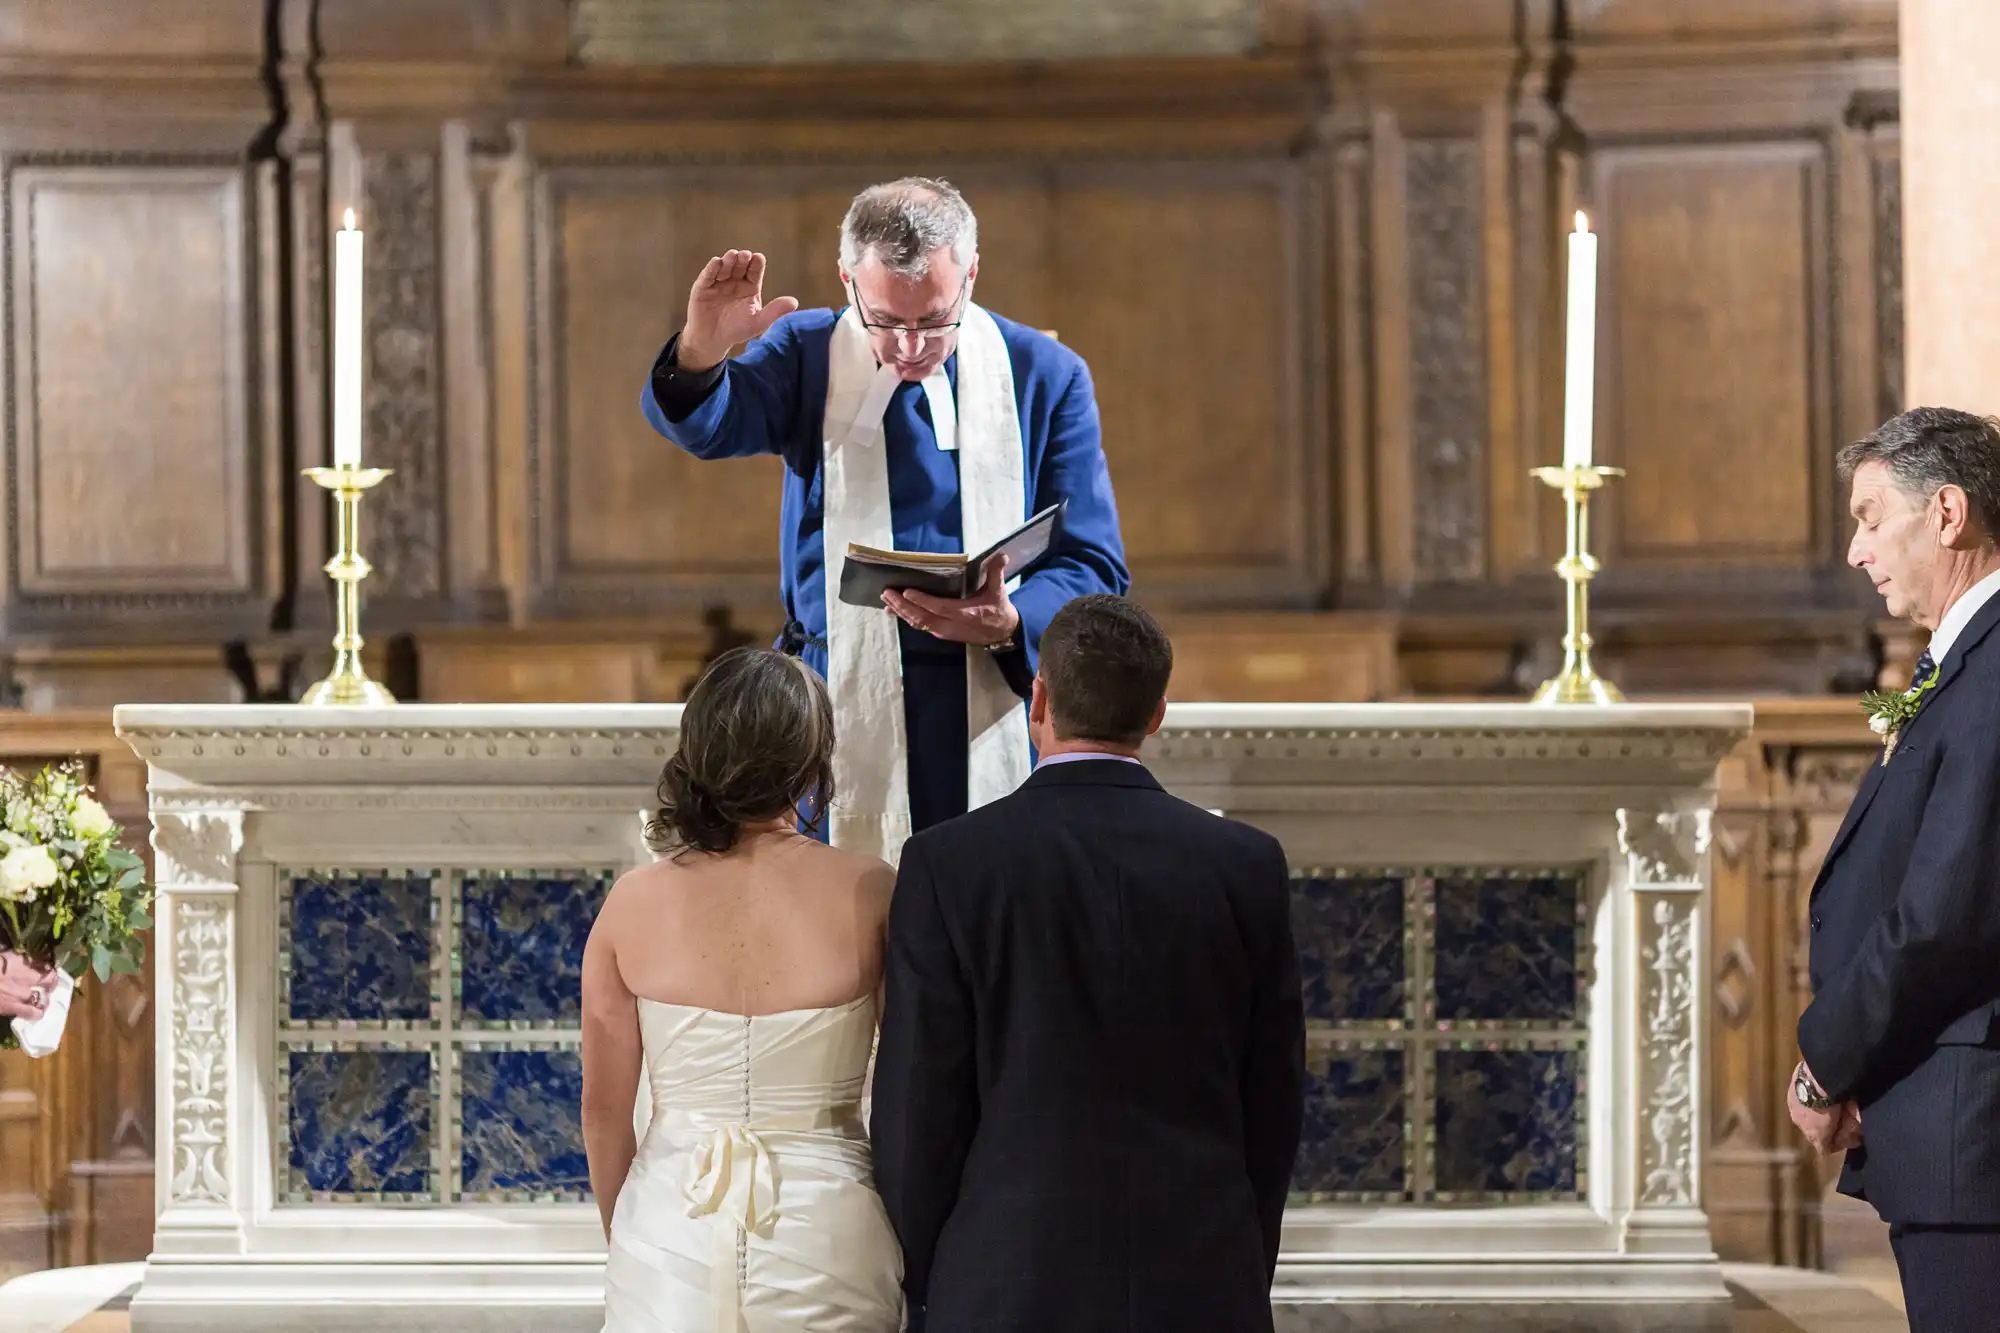 A priest conducting a wedding ceremony for a couple inside a church, with lit candles on an altar.